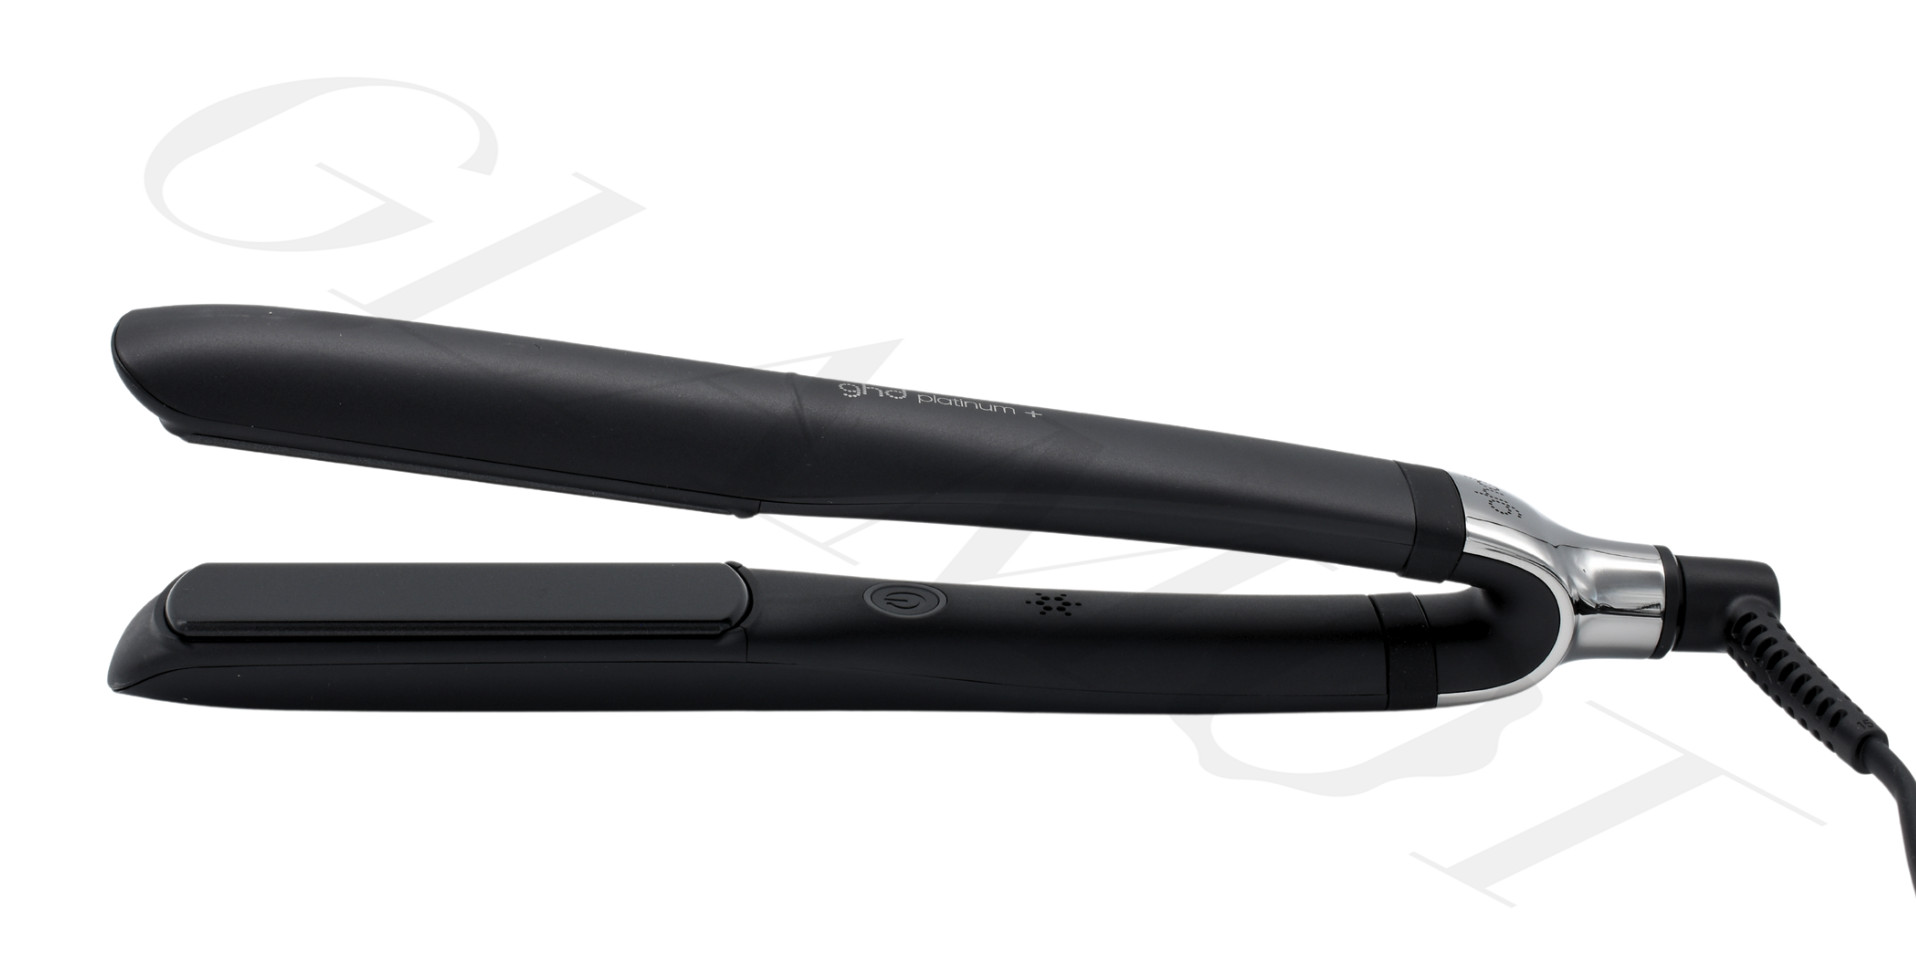  ghd Platinum+ Styler ― 1 Flat Iron Hair Straightener,  Professional Ceramic Hair Styling Tool for Stronger Hair, More Shine, &  More Color Protection ― White : Beauty & Personal Care